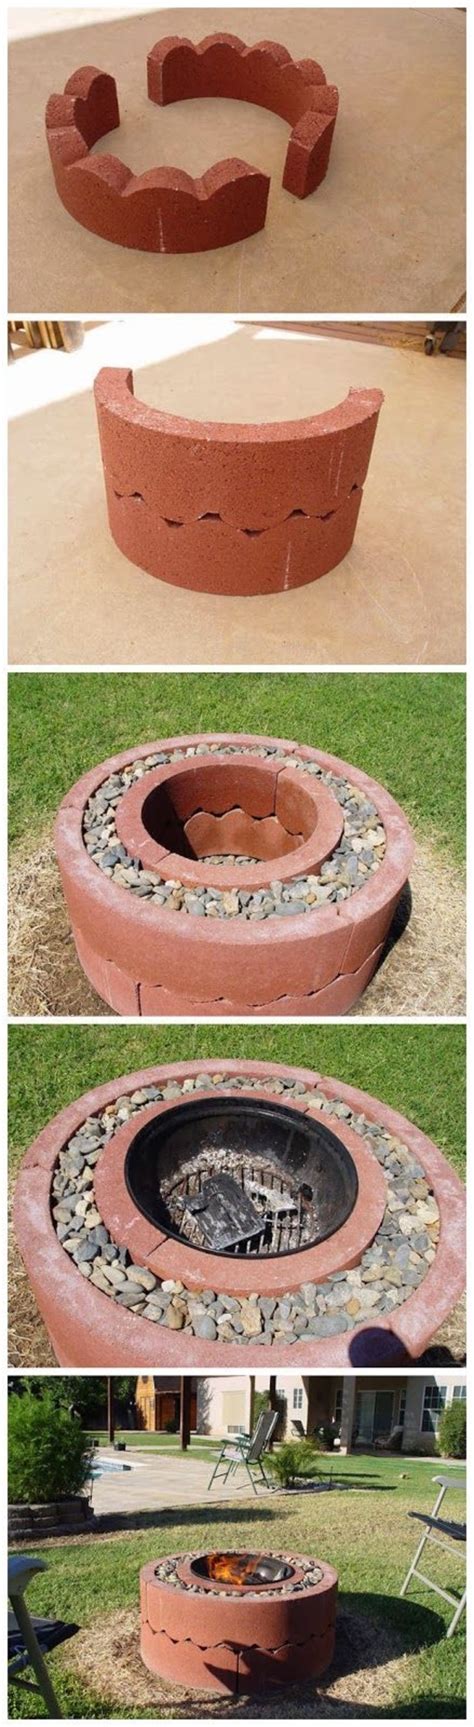 10 Diy Fire Pit Ideas And Projects